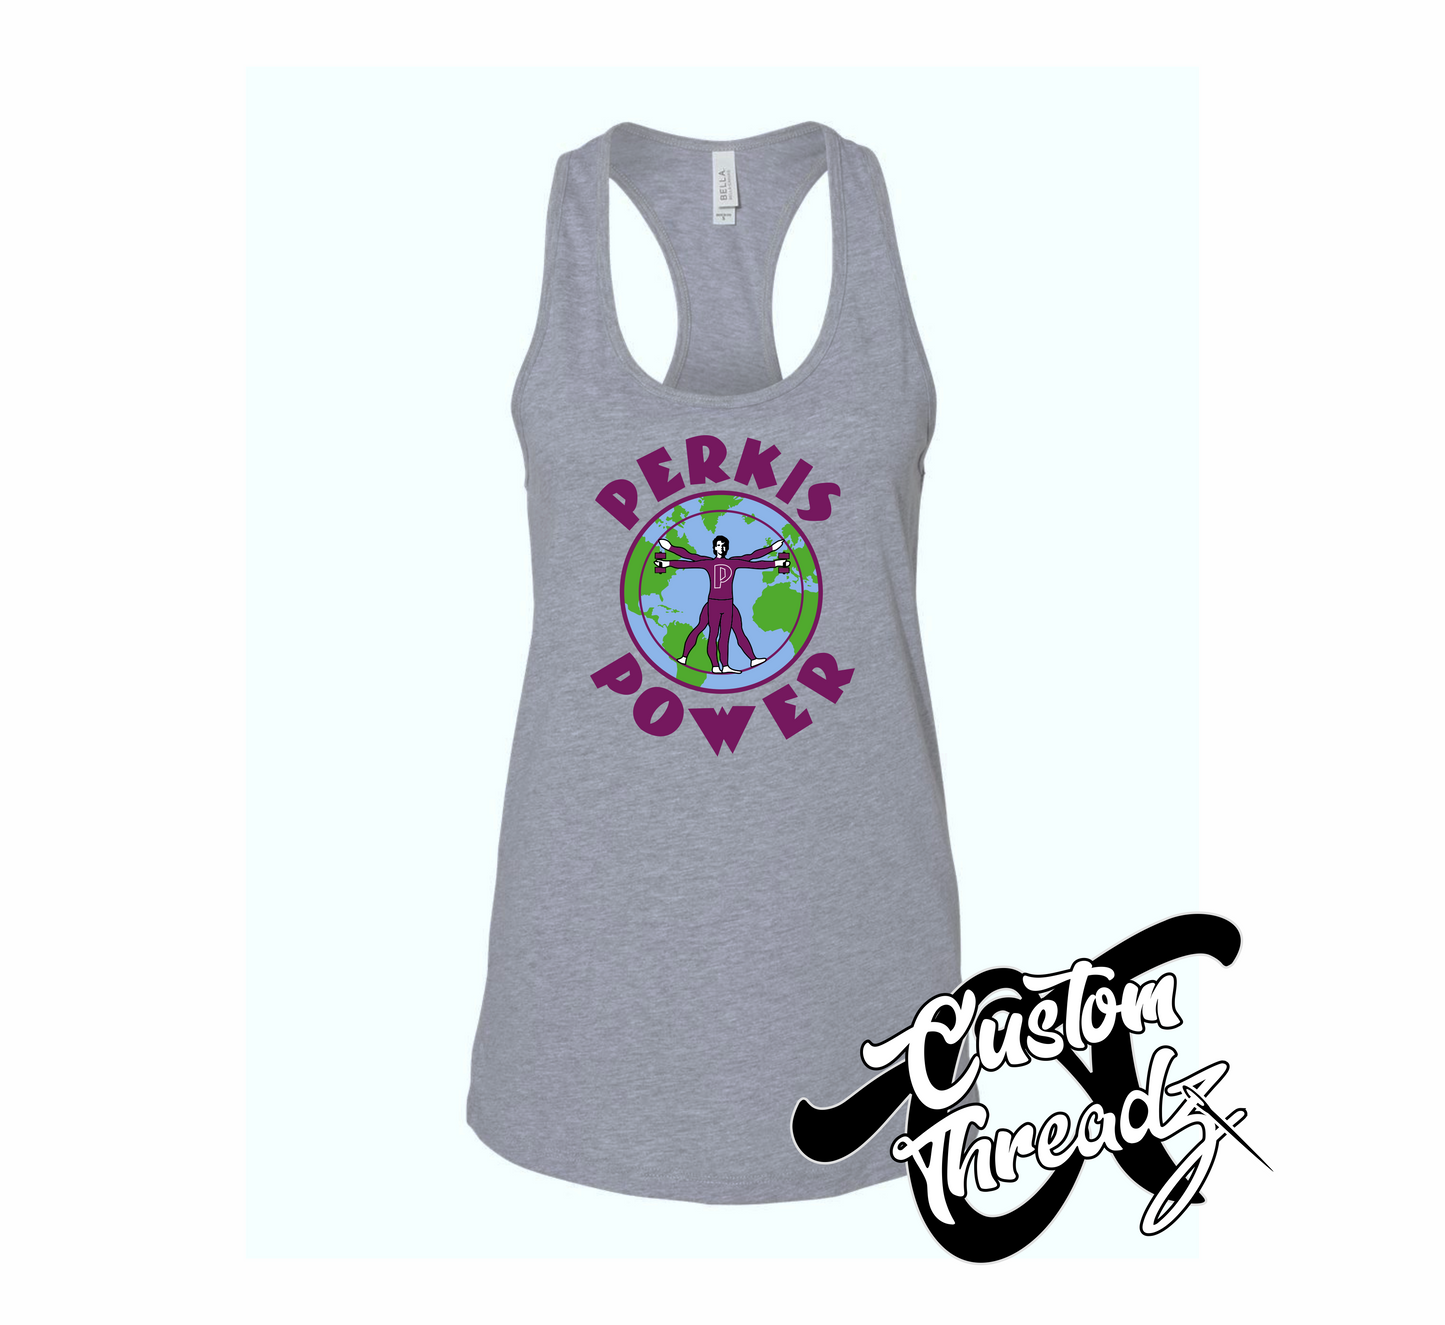 athletic heather grey womens tank top with perkis power heavyweights DTG printed design